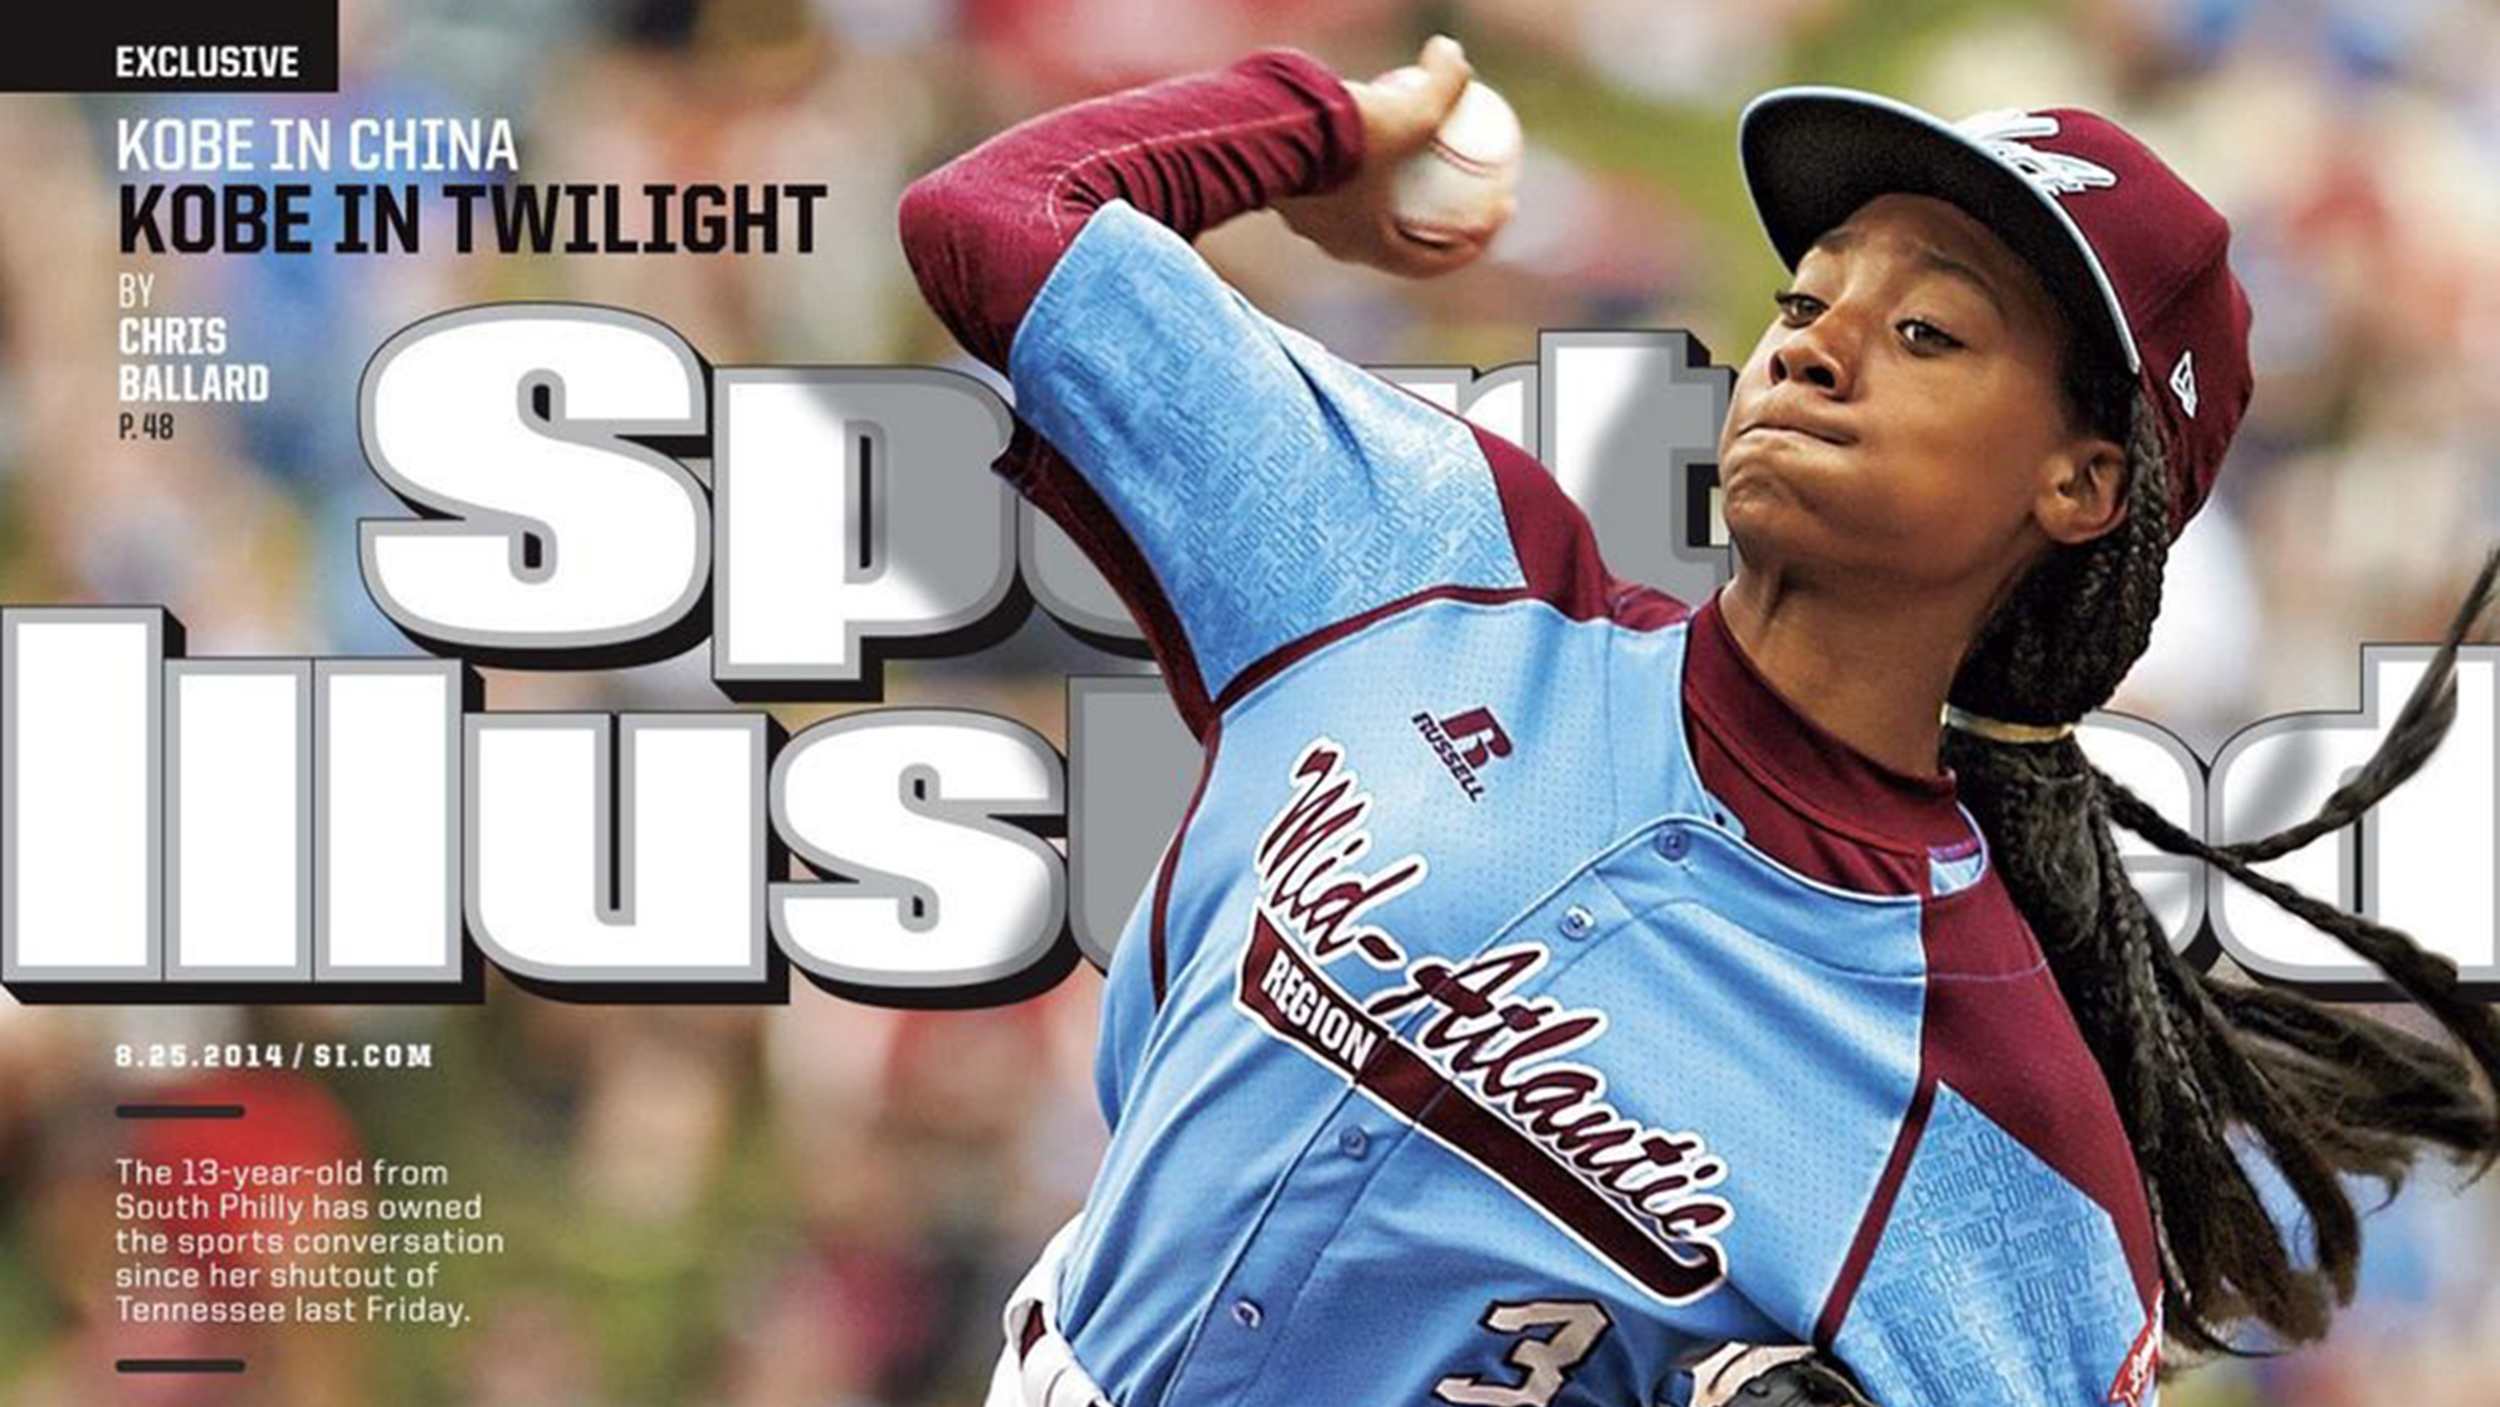 Little League pitcher Mo'ne Davis makes cover of Sports Illustrated